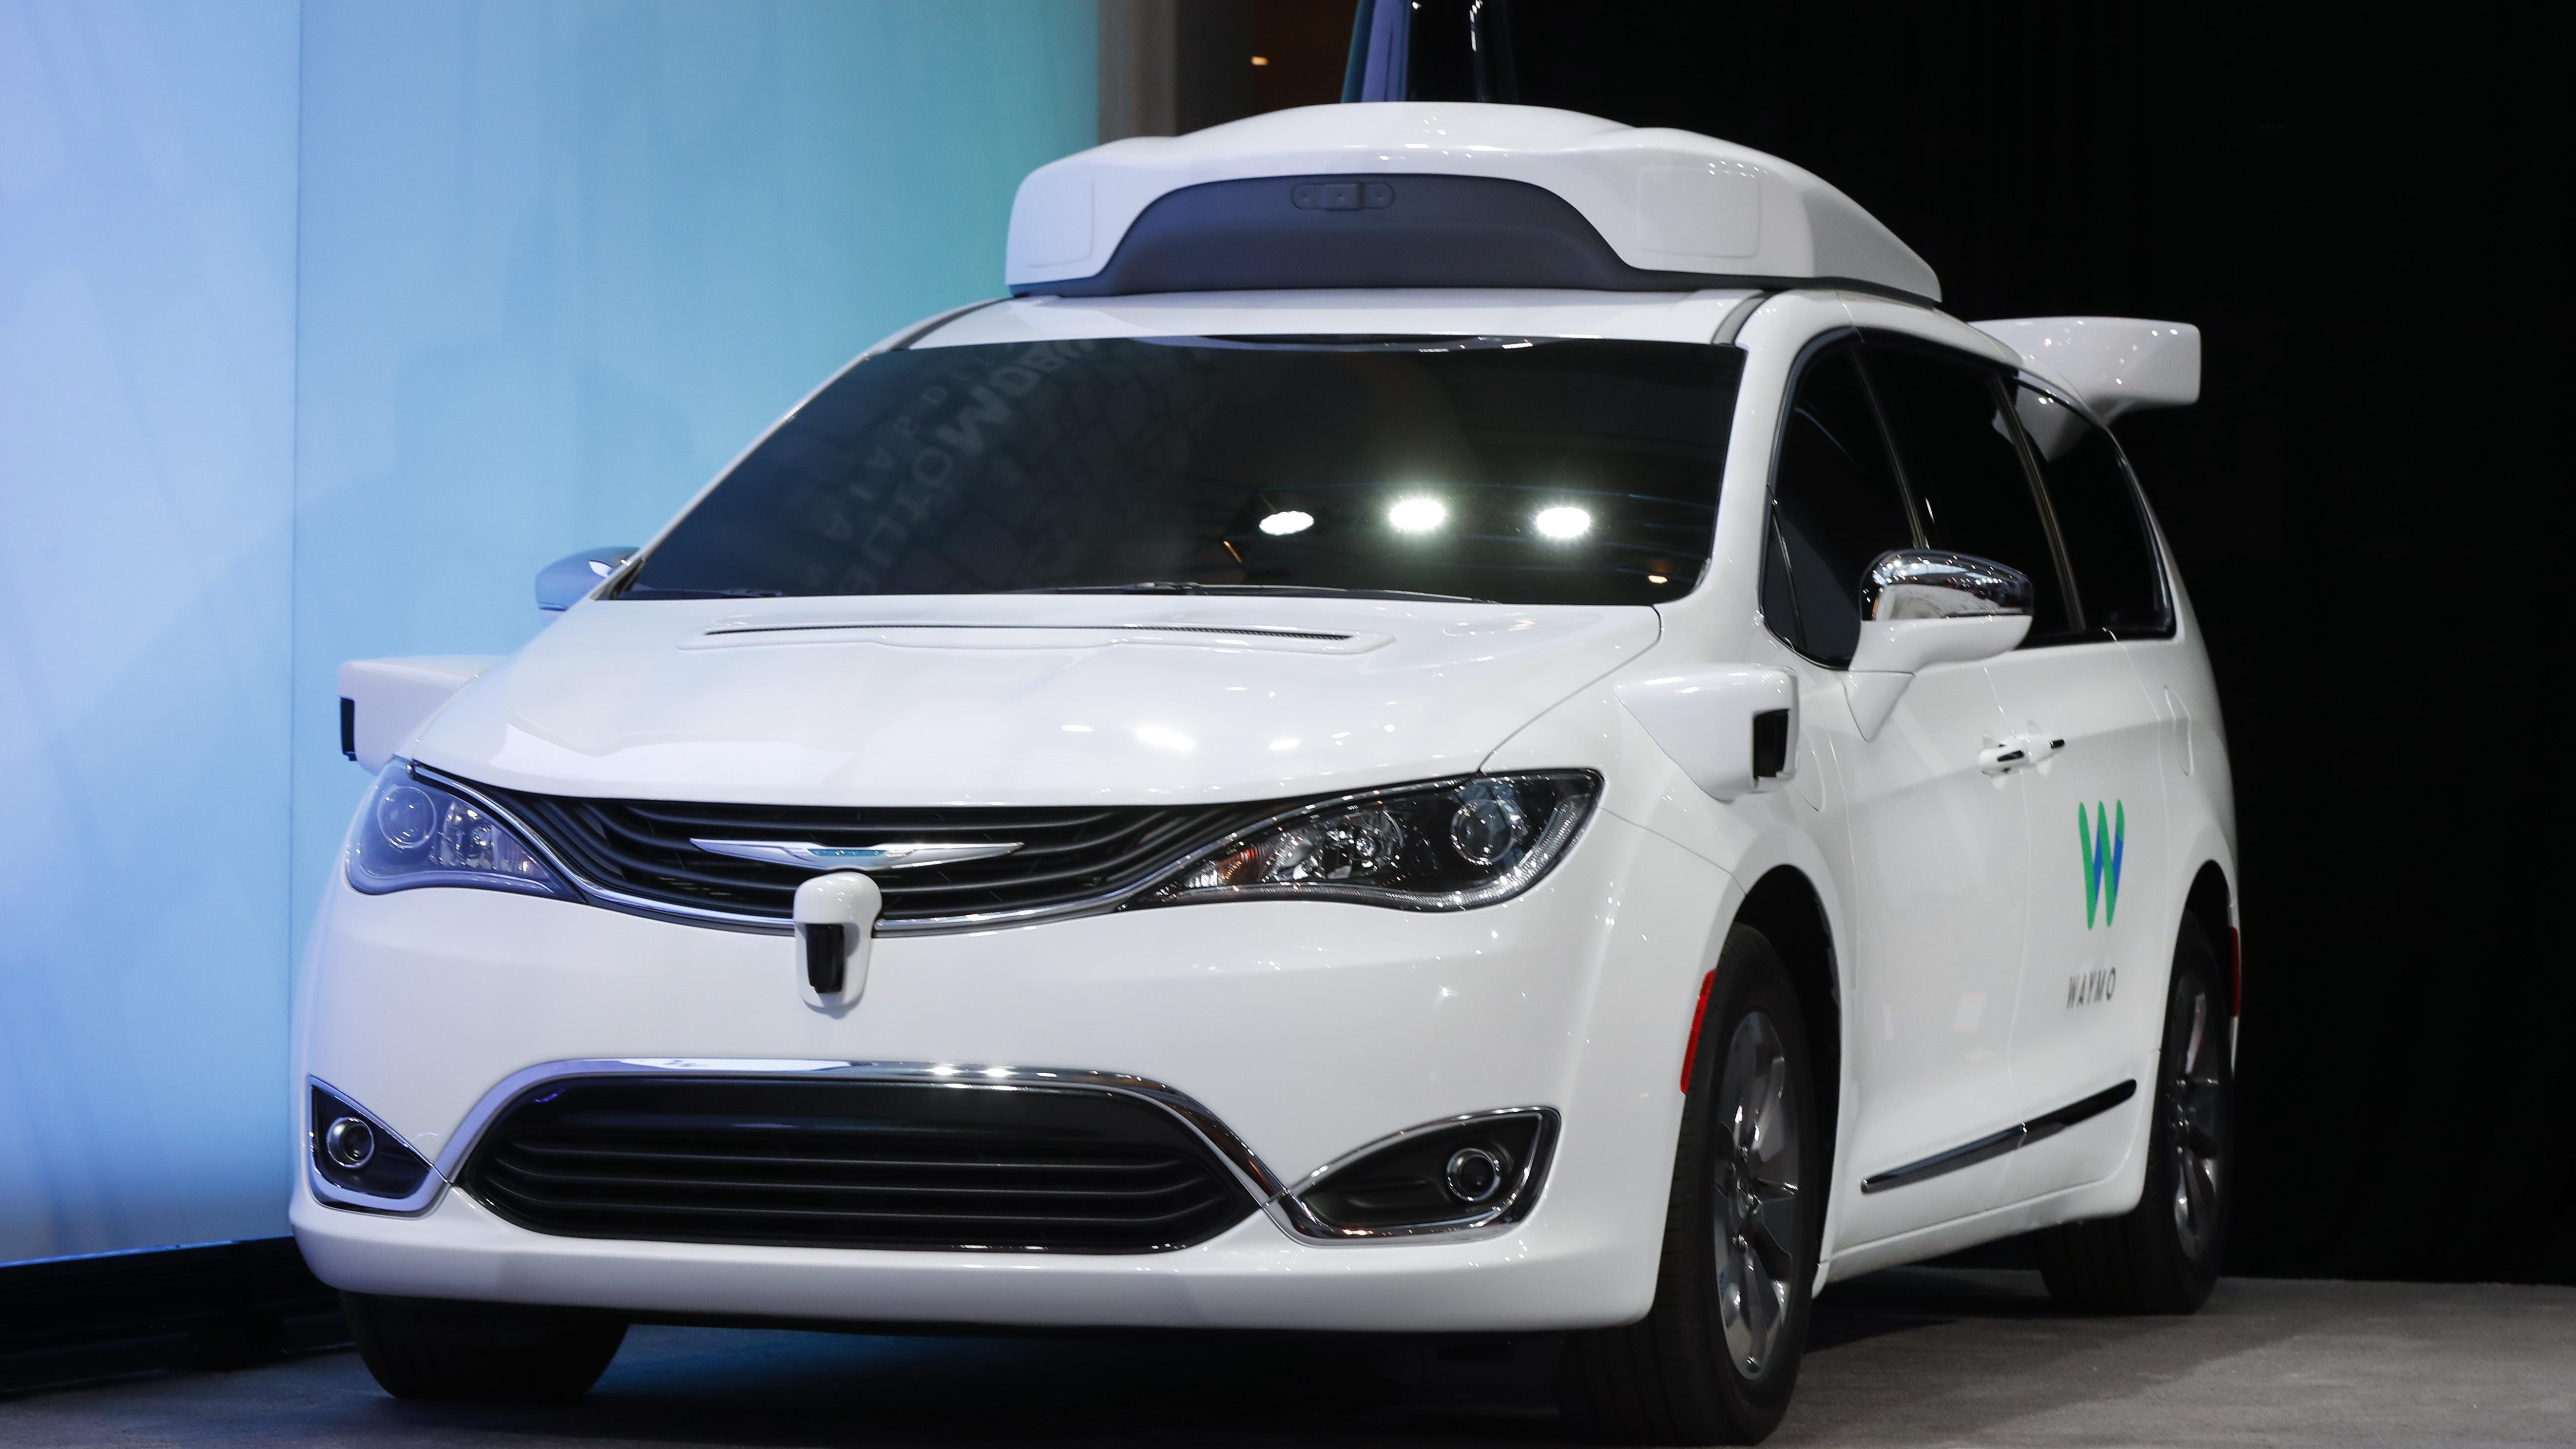 A Chrysler Pacifica hybrid outfitted with Waymo's suite of sensors and radar is shown at the North American International Auto Show in Detroit.